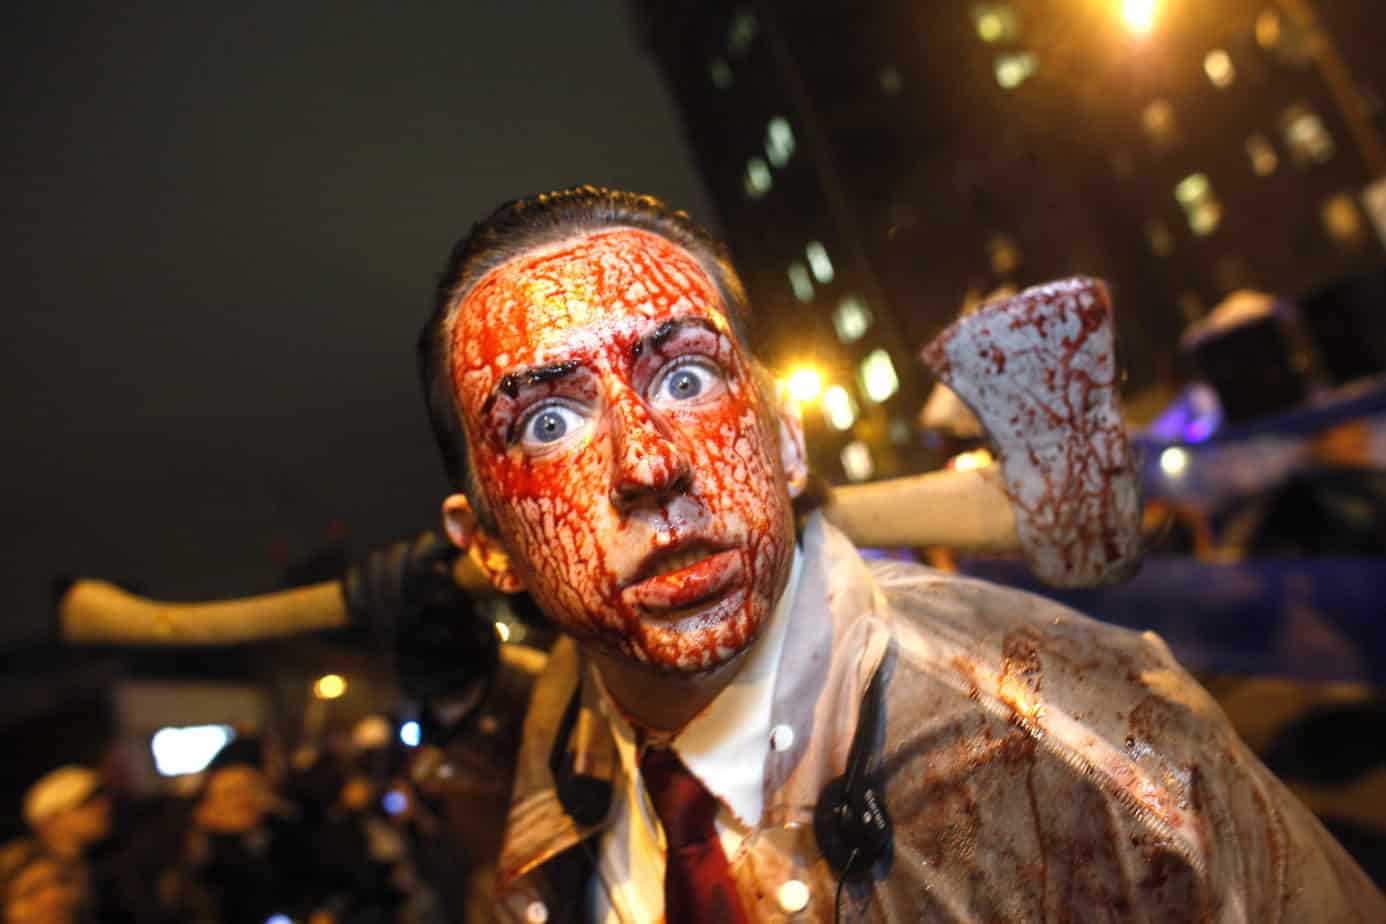 A friendly man with spooky makeup and a knife, ready to scare you with his Halloween costume at New York's Village Halloween Parade -- a top LGBTQ+ Halloween event